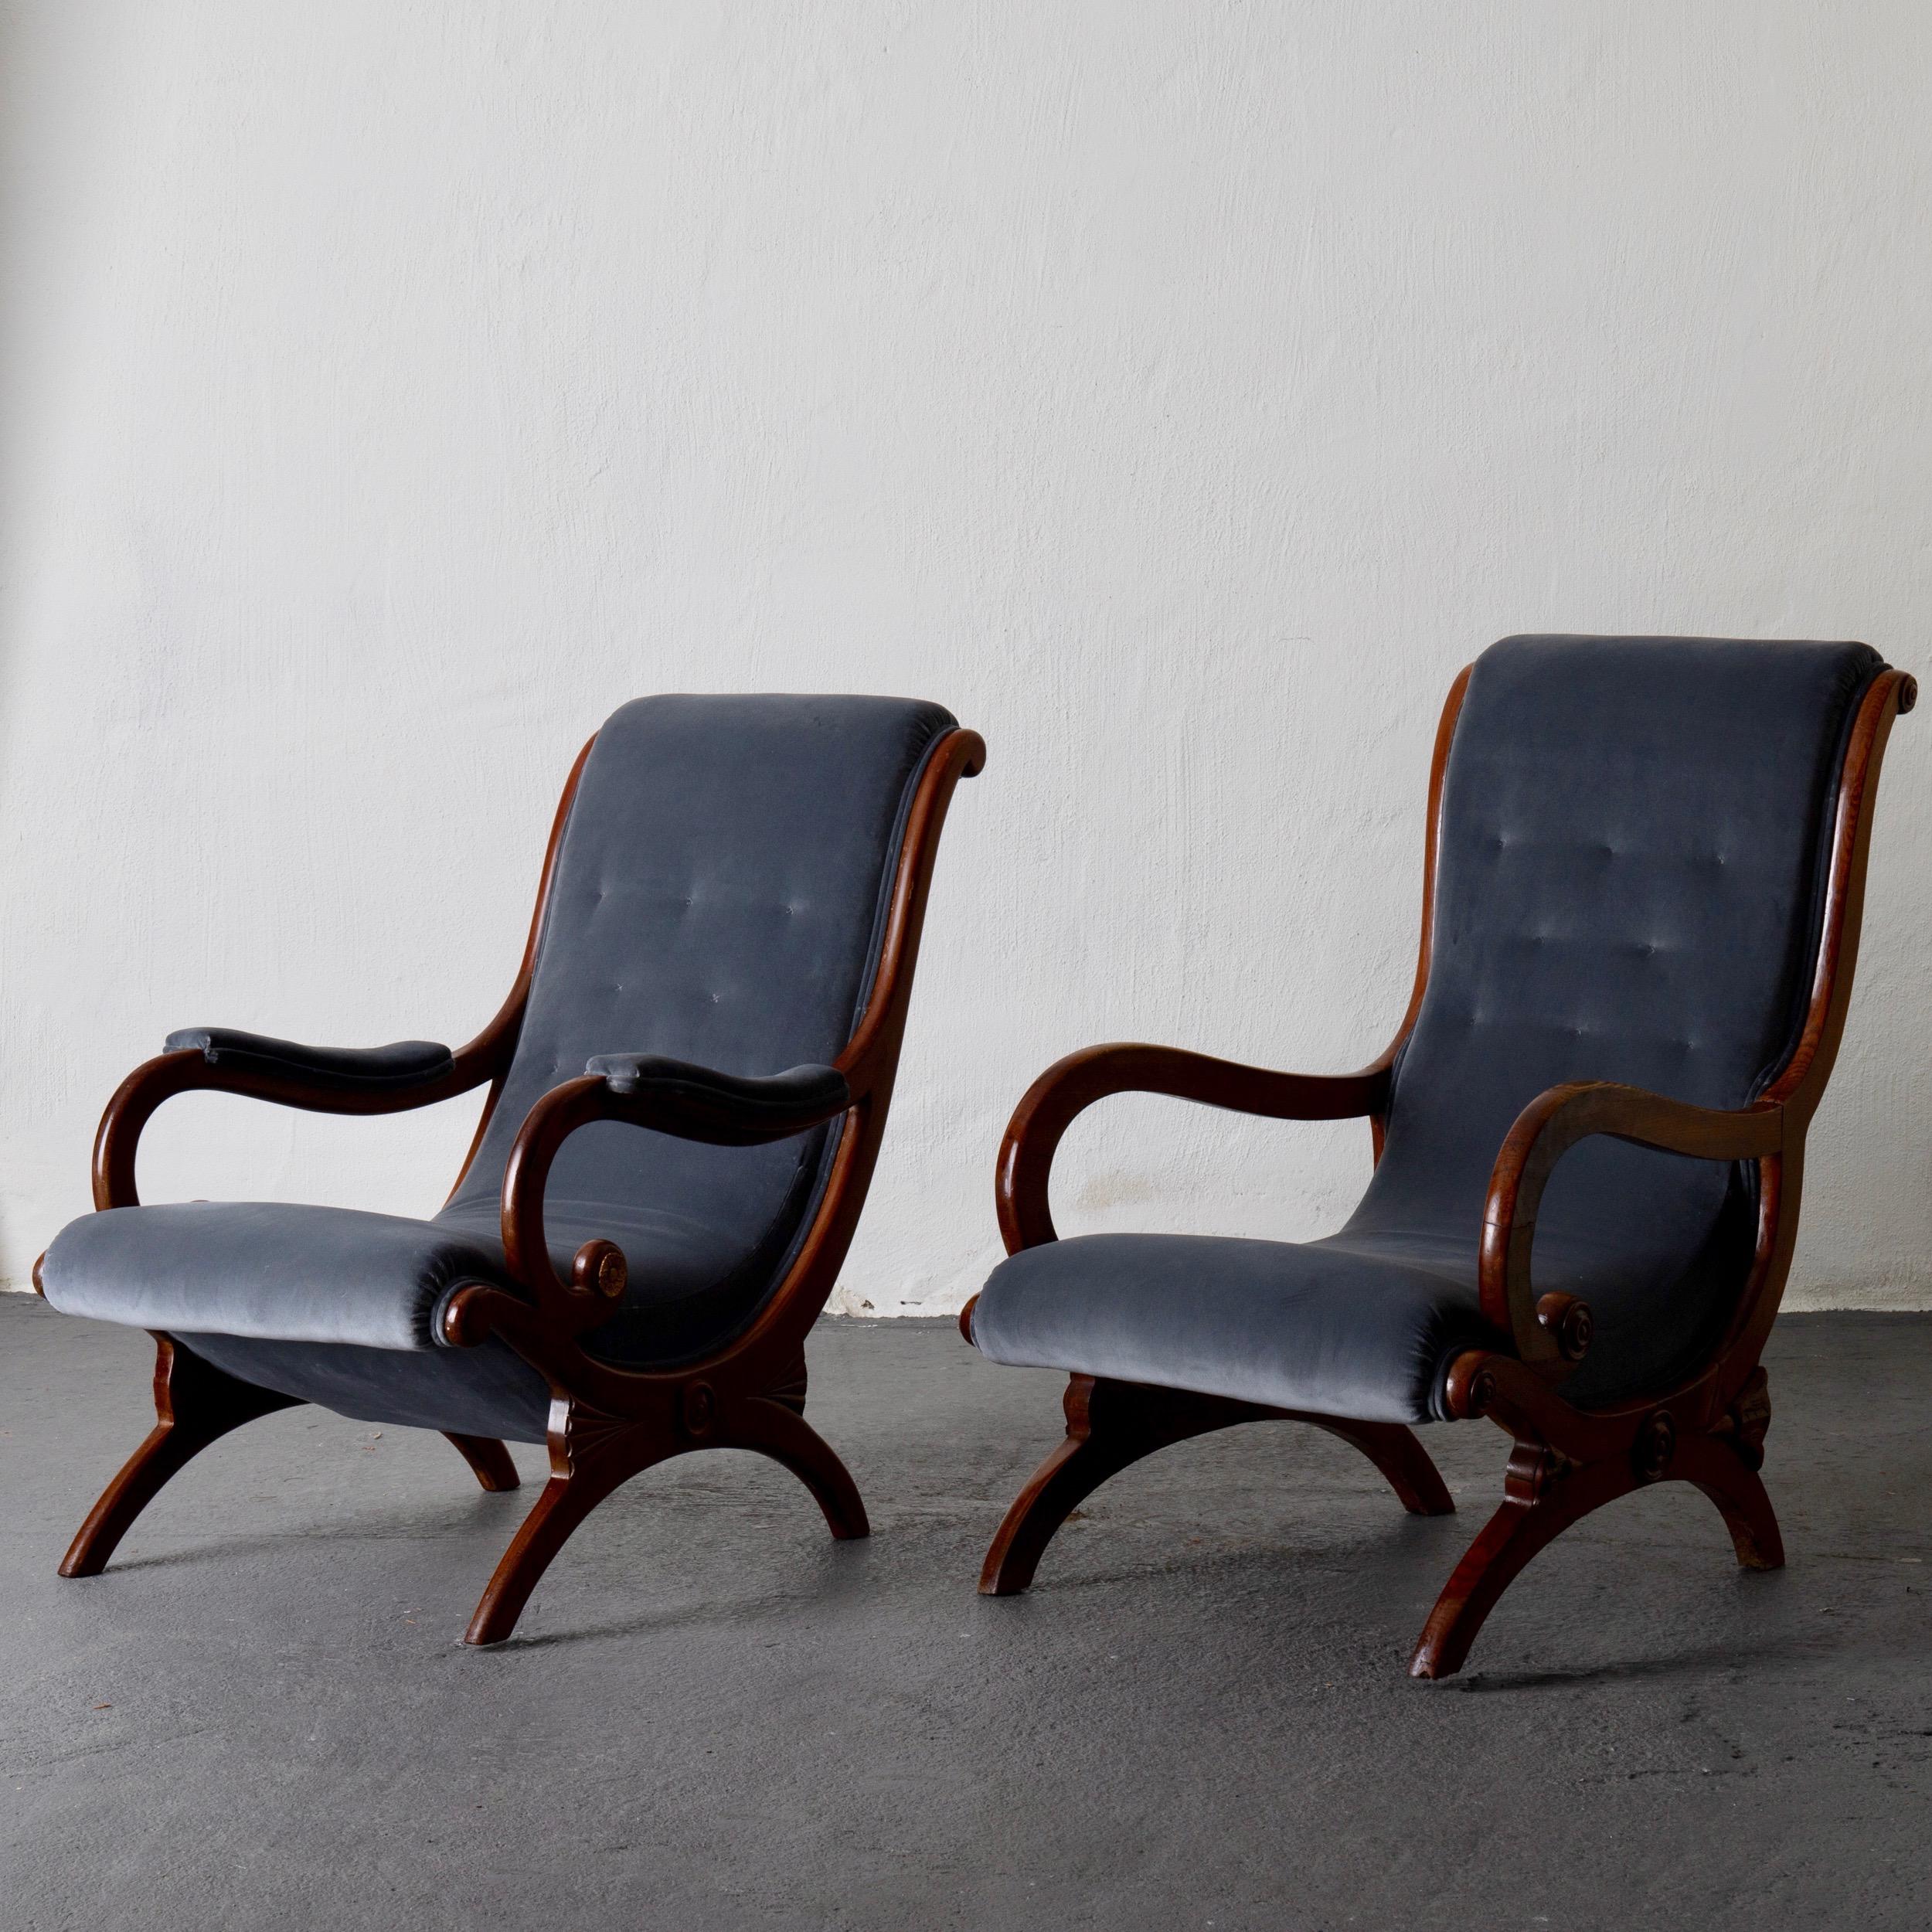 Chairs easy Swedish Mahogany gray velvet 19th century, Sweden. An assembled pair of lounge chairs made in Sweden during the Karl Johan period, mid-19th century. Upholstered in a bluish gray velvet. Frame in a mid-colored brown. Elegant and